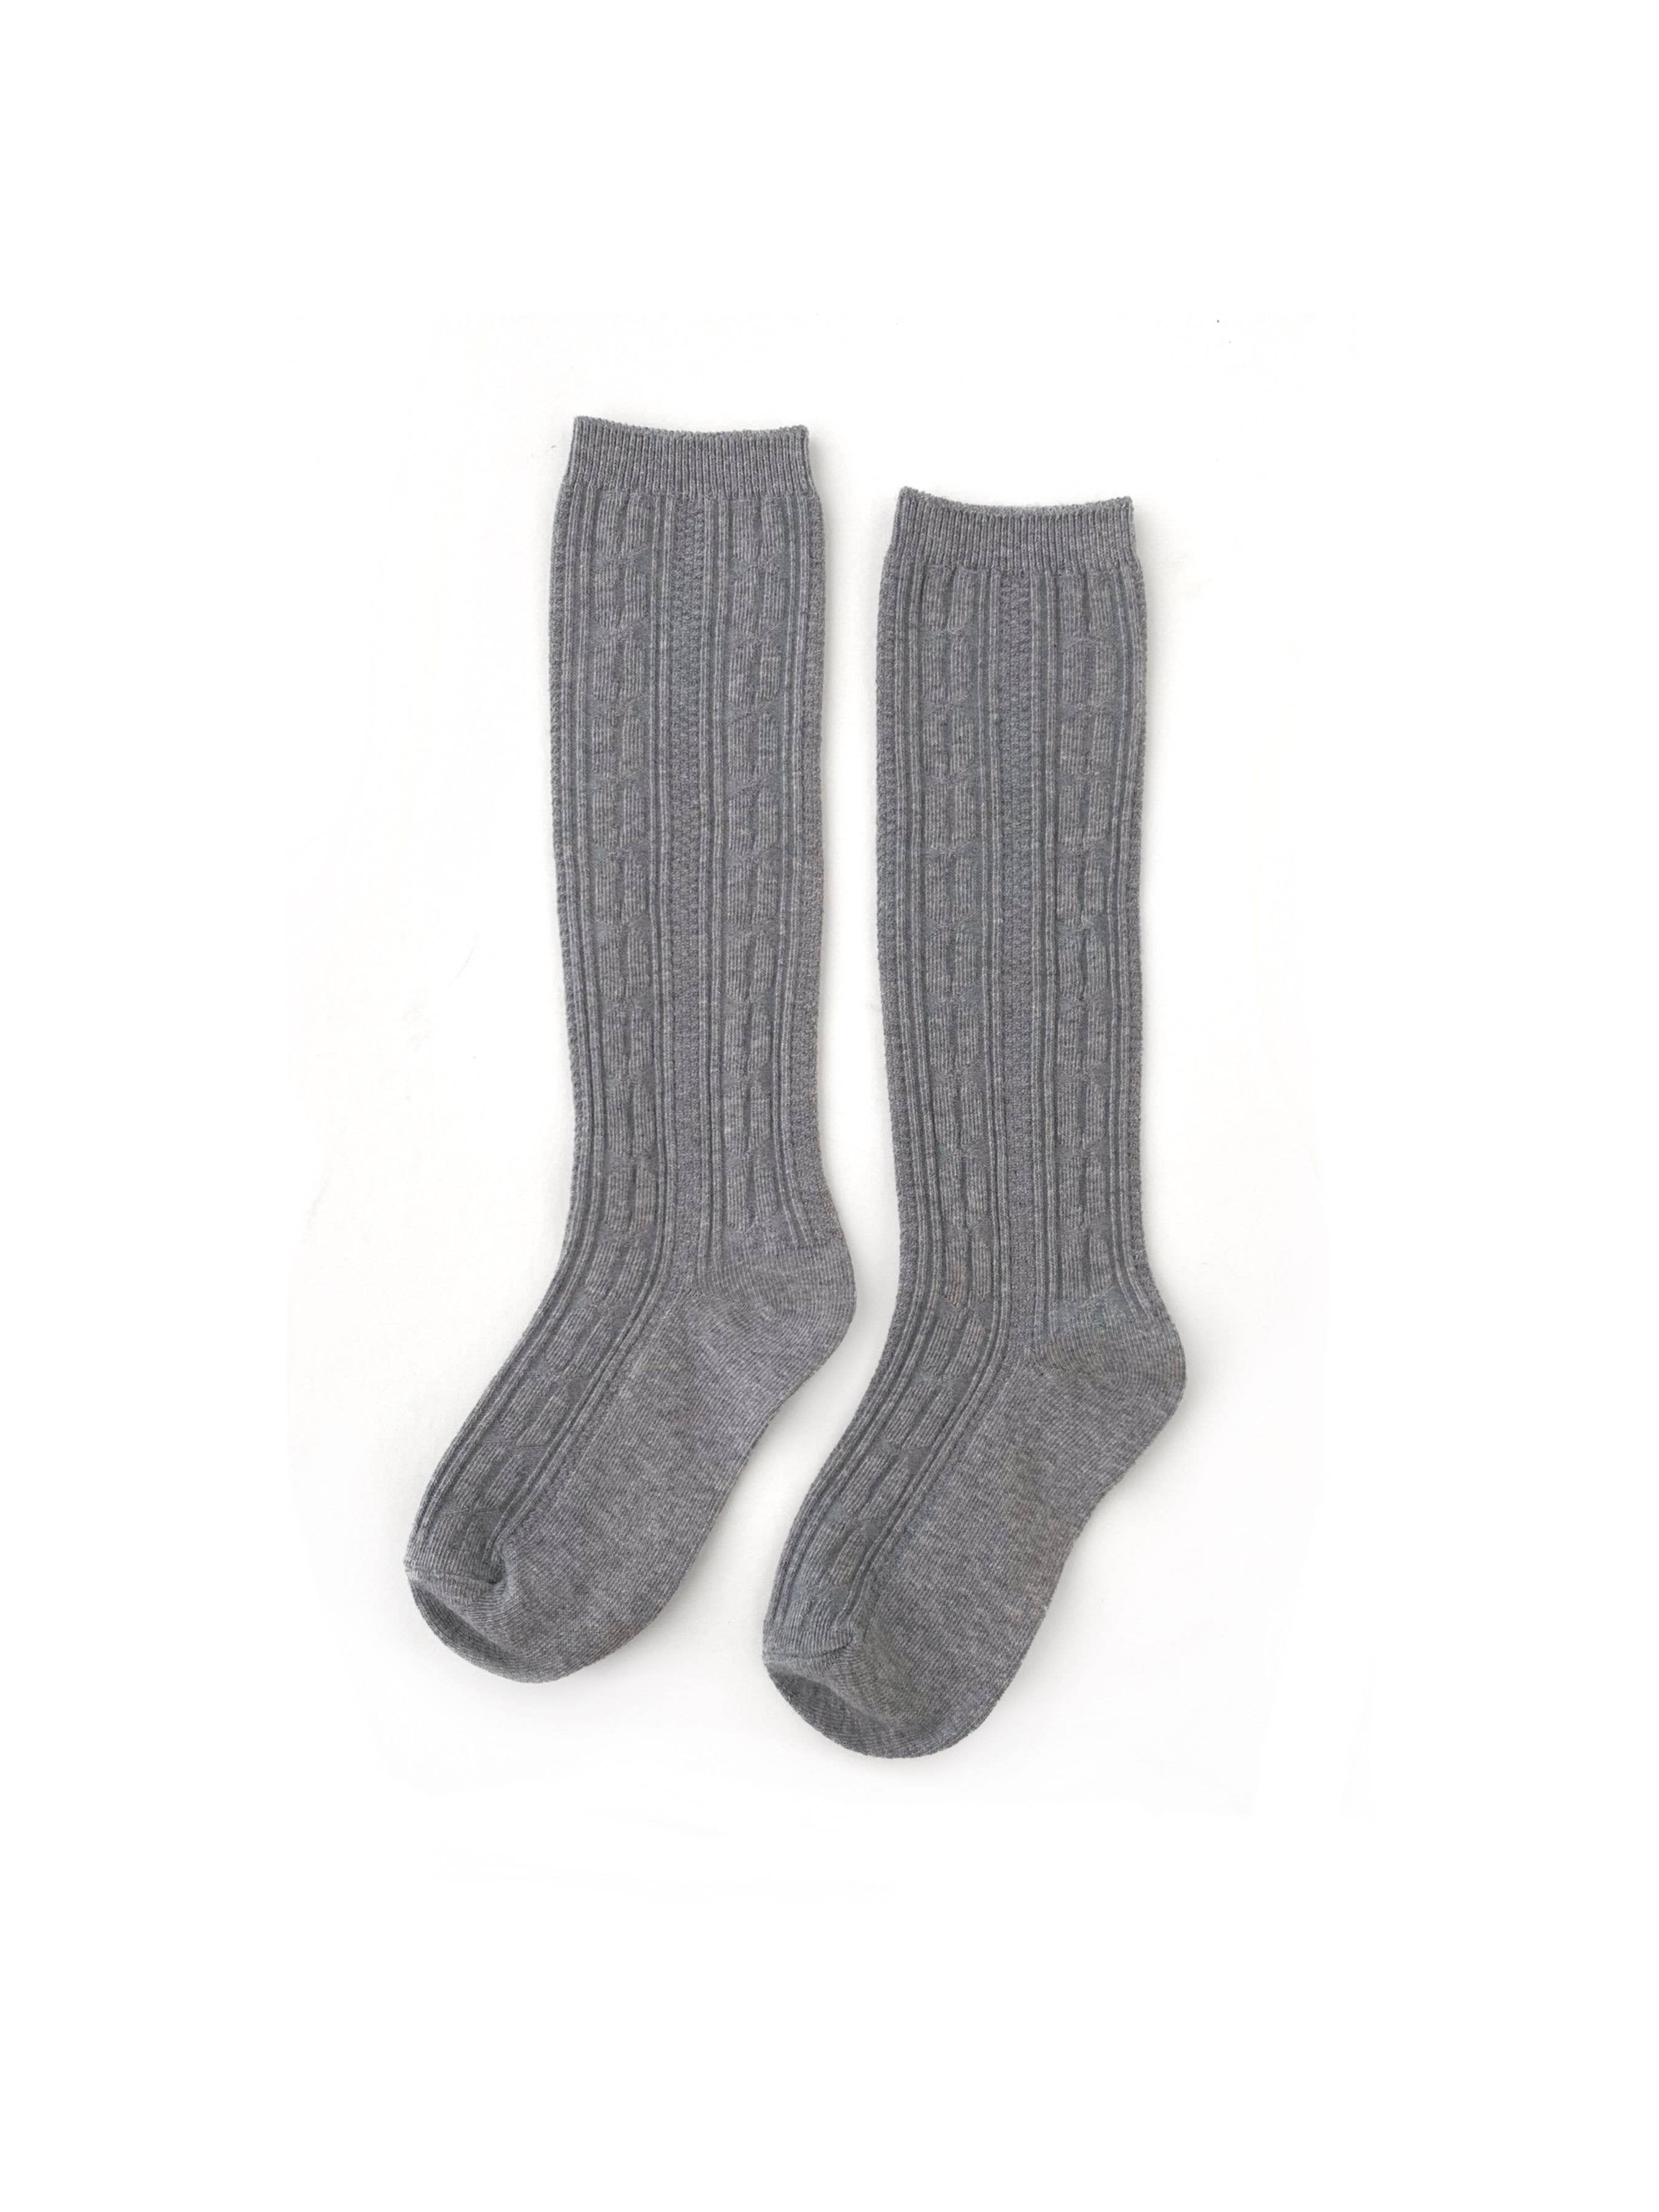 Grey Cable Knit  Knee High Socks  A Touch of Magnolia Boutique   